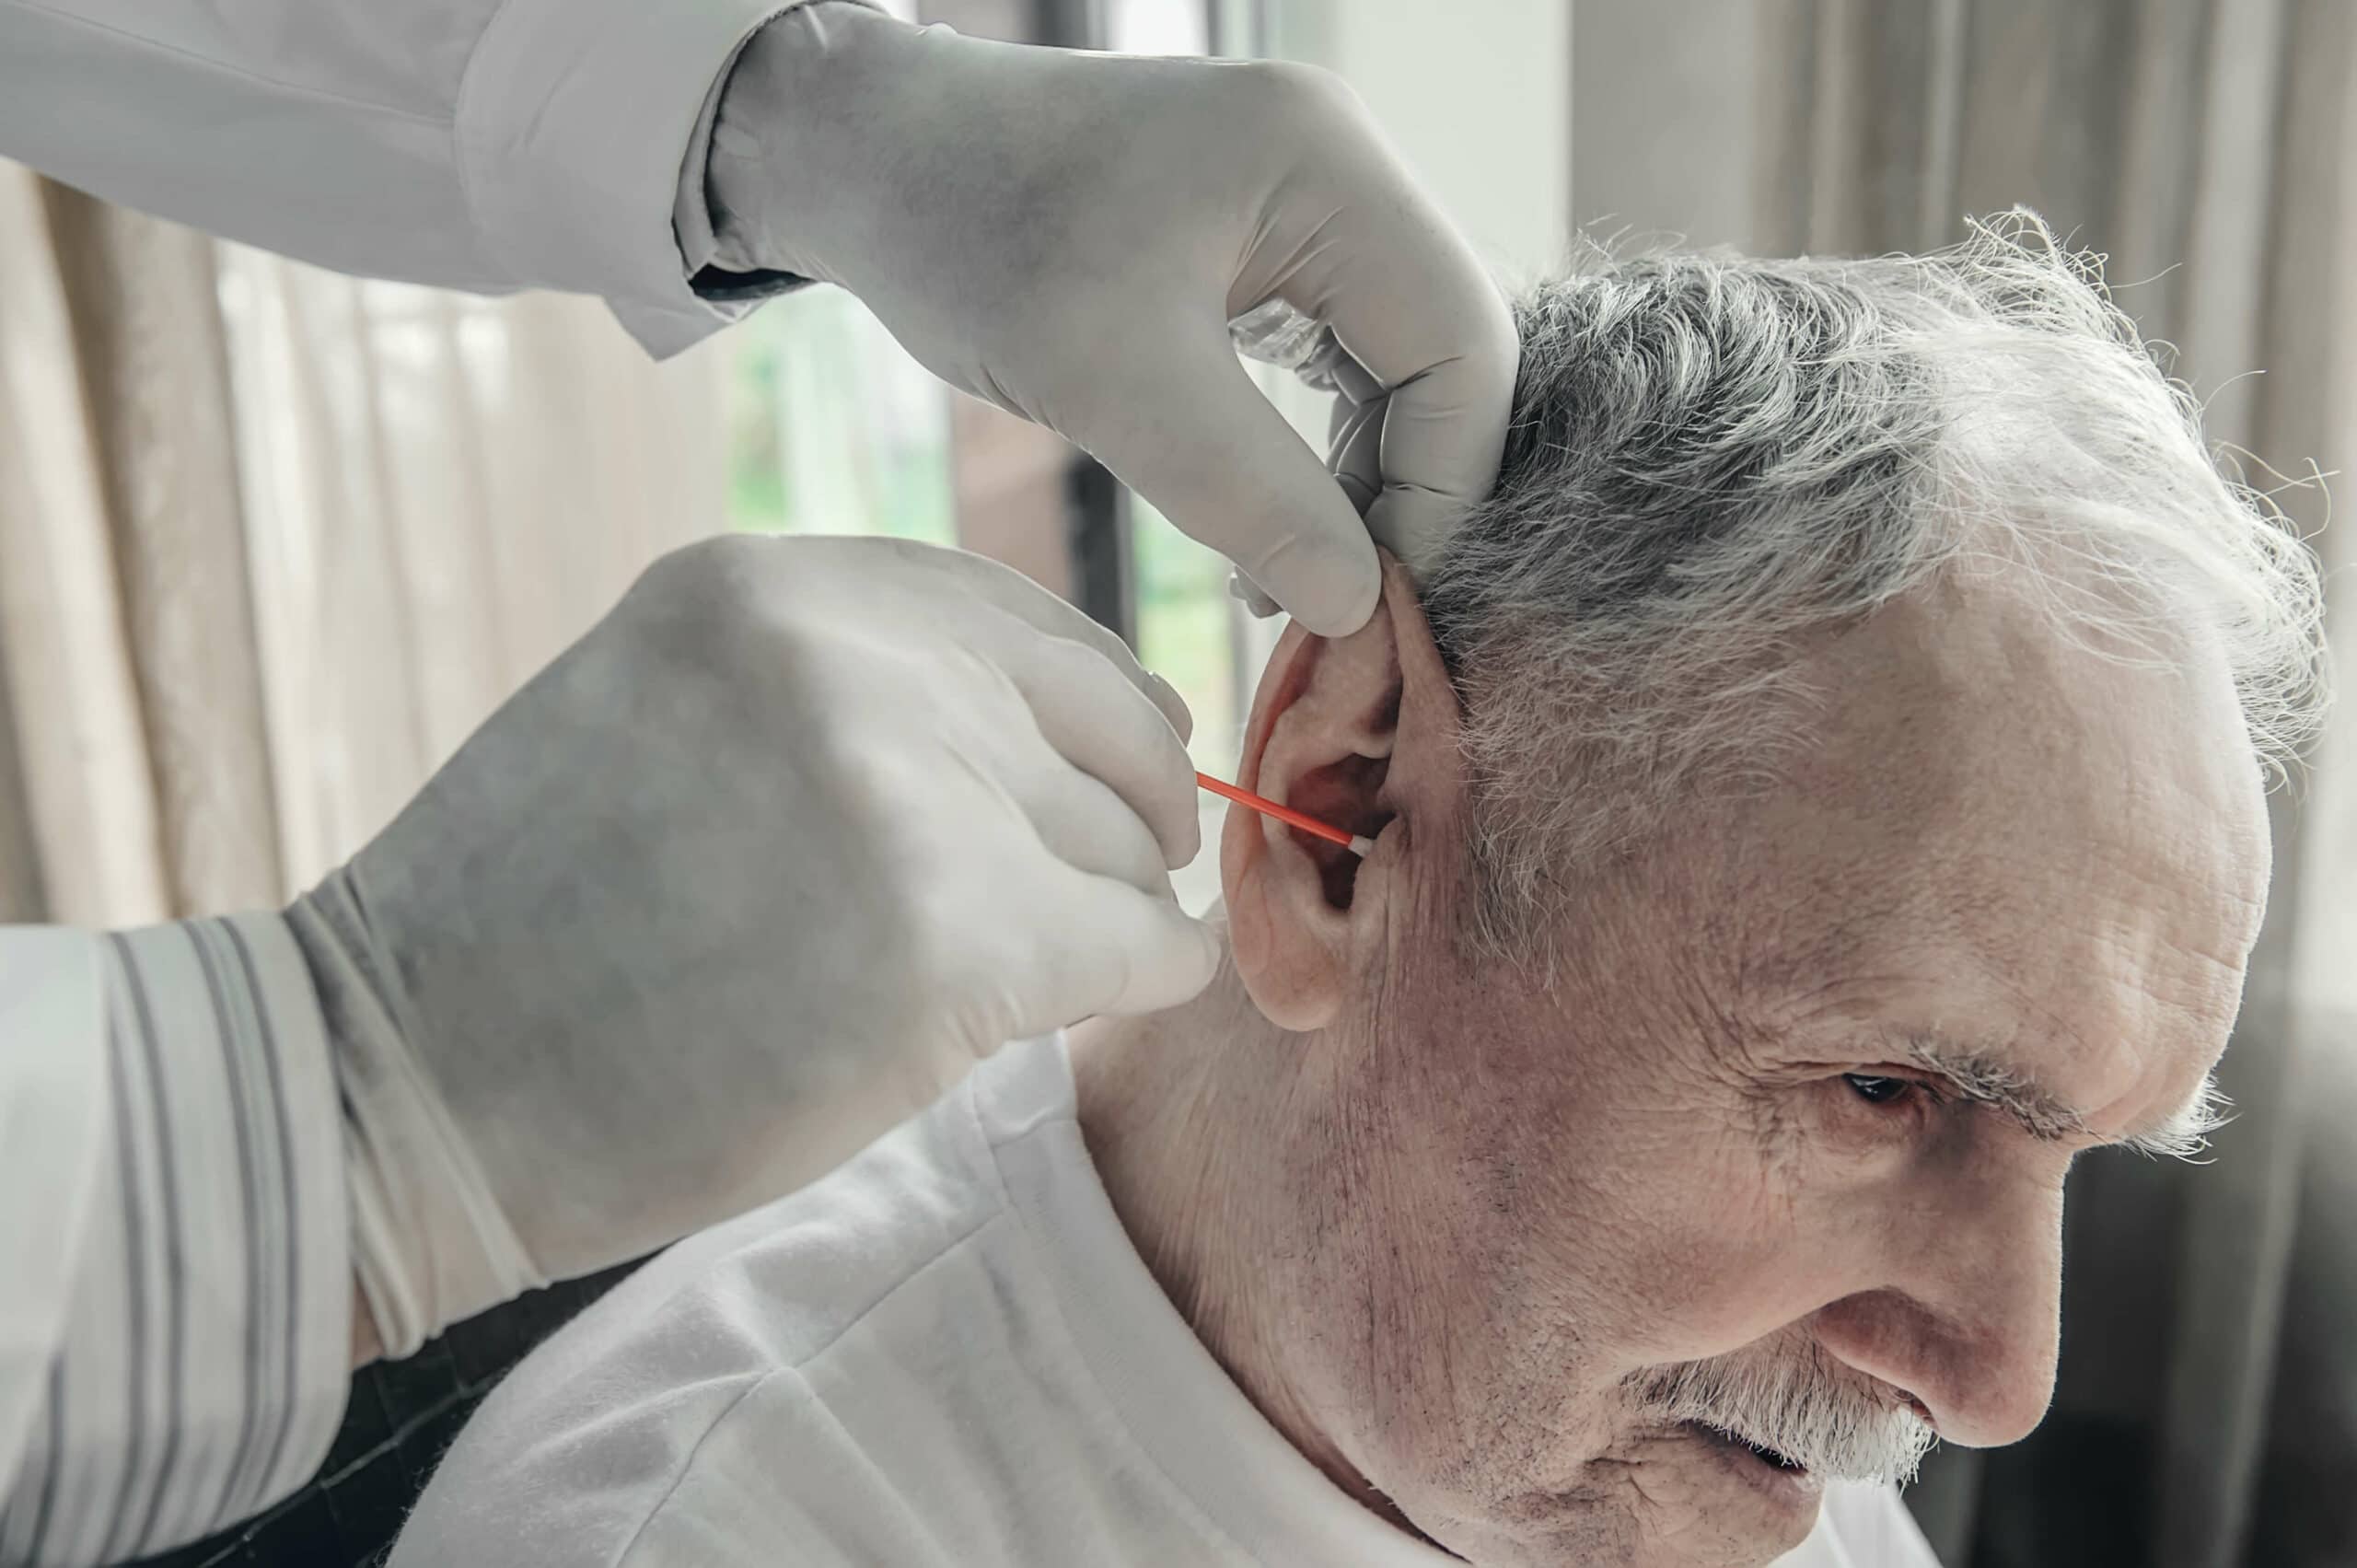 Why You Should Book a Professional Ear Cleaning